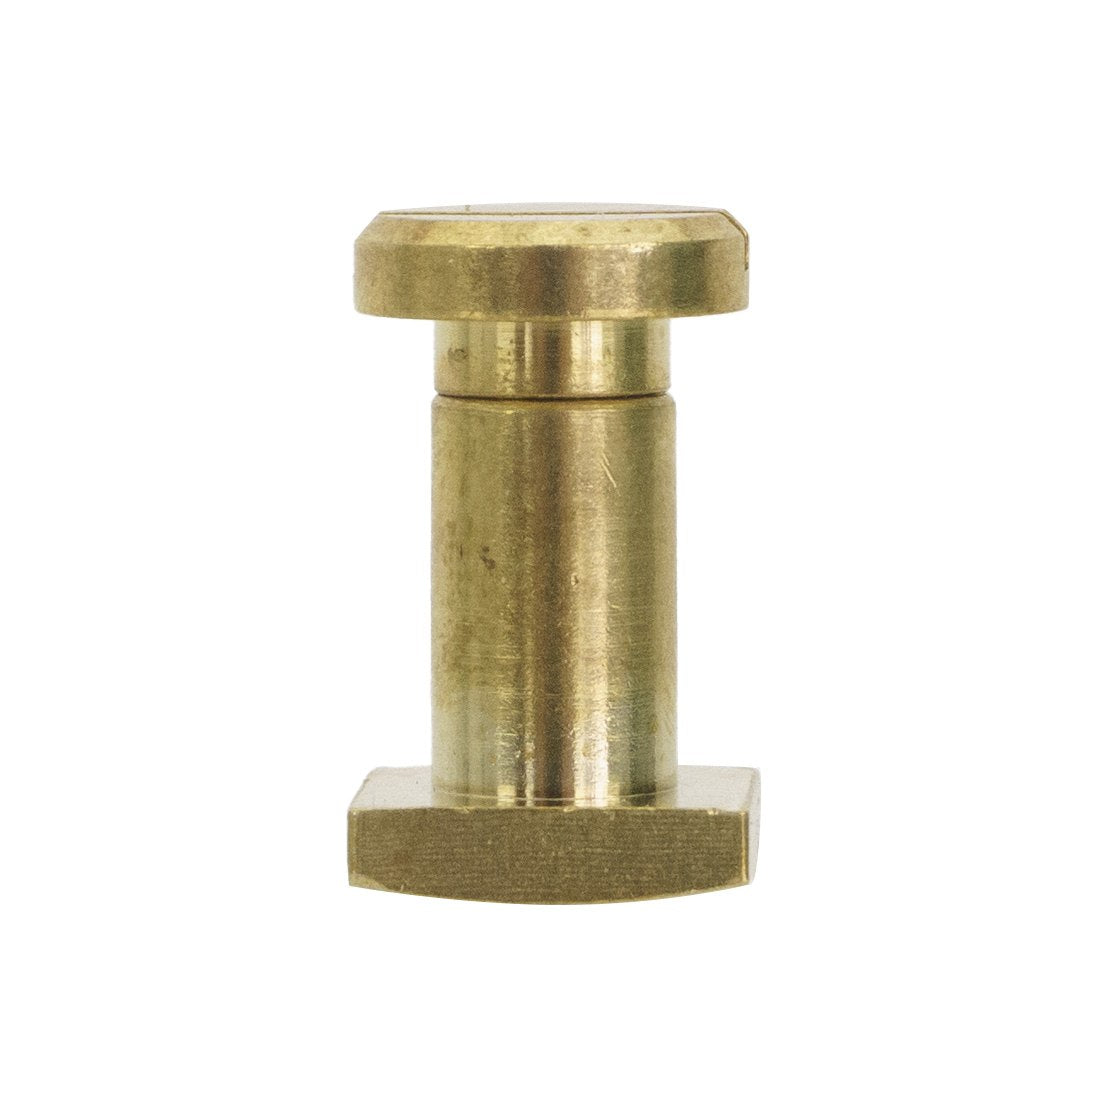 Sörbo Replacement Square Nut and Screw - 1385 Series Front View